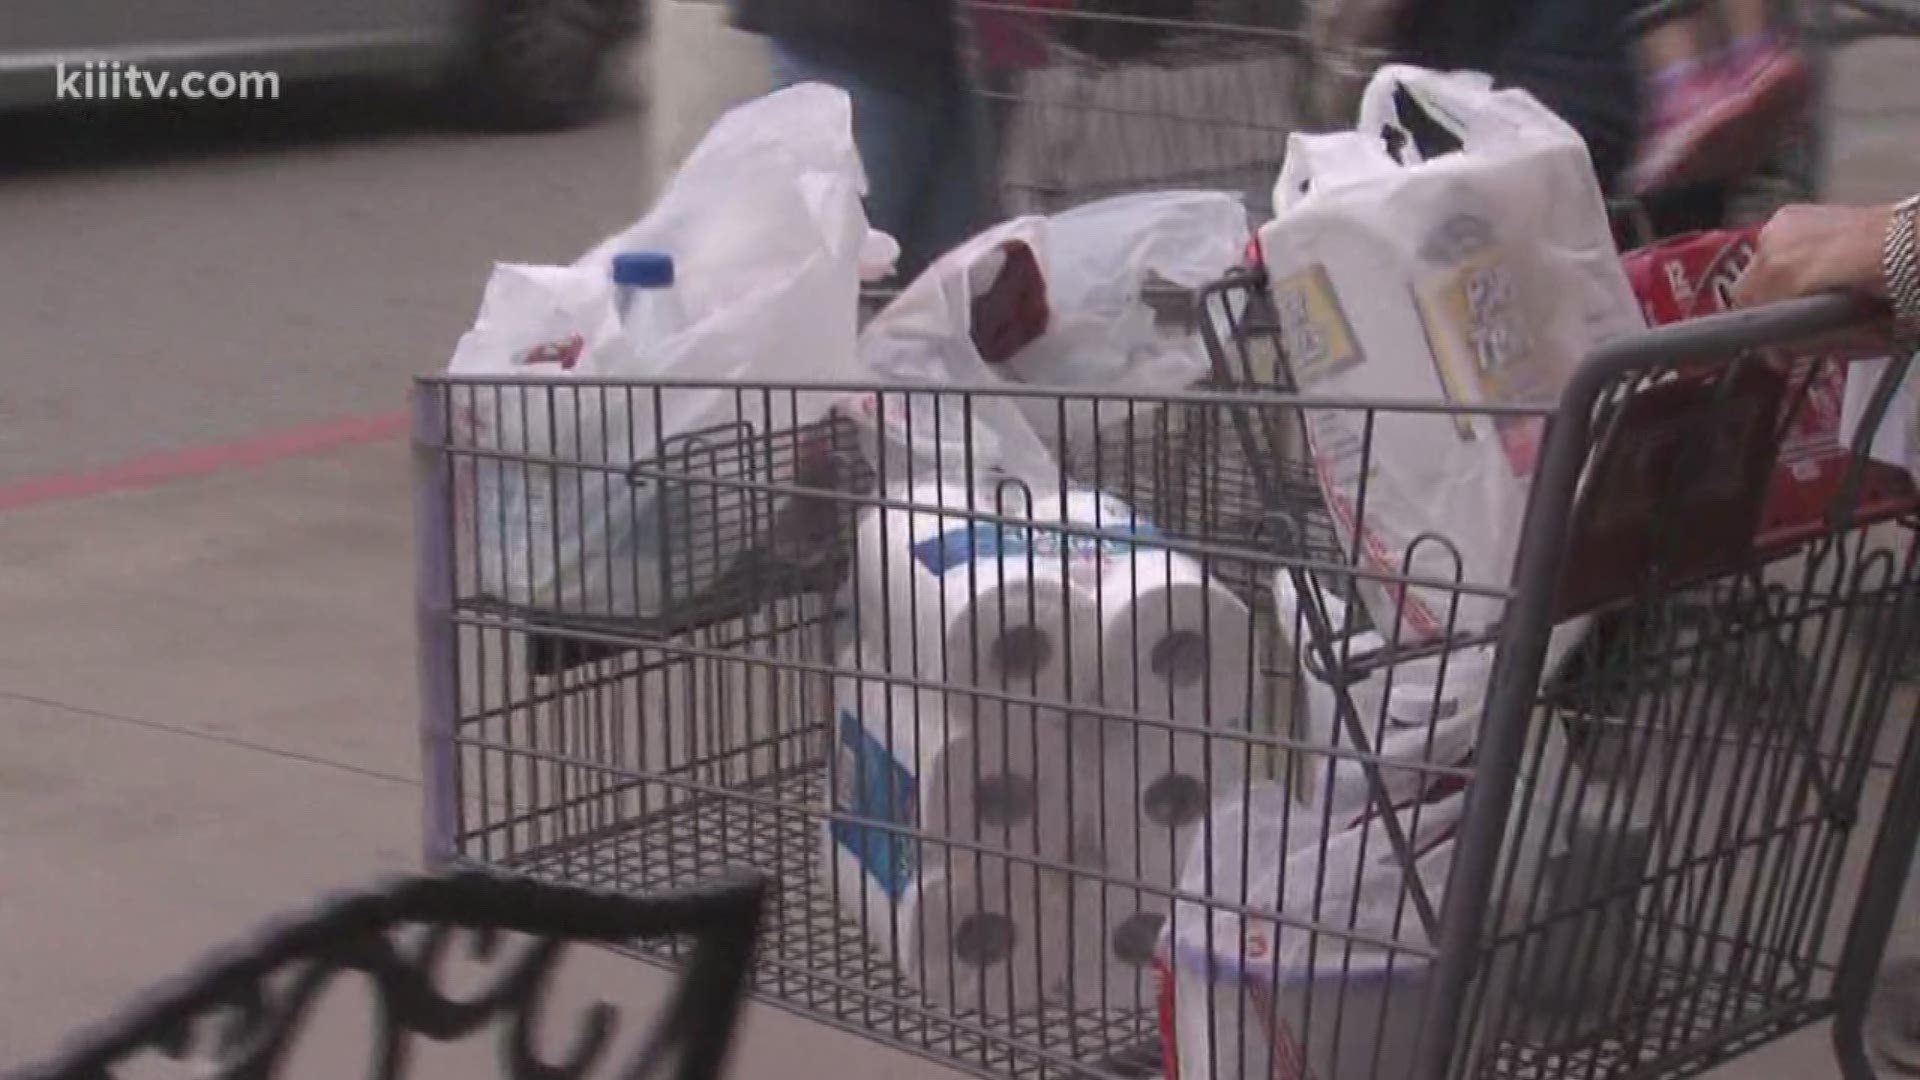 A state representative out of San Antonio has introduced a bill that could change the way the City of Corpus Christi regulates the use of plastic shopping bags.